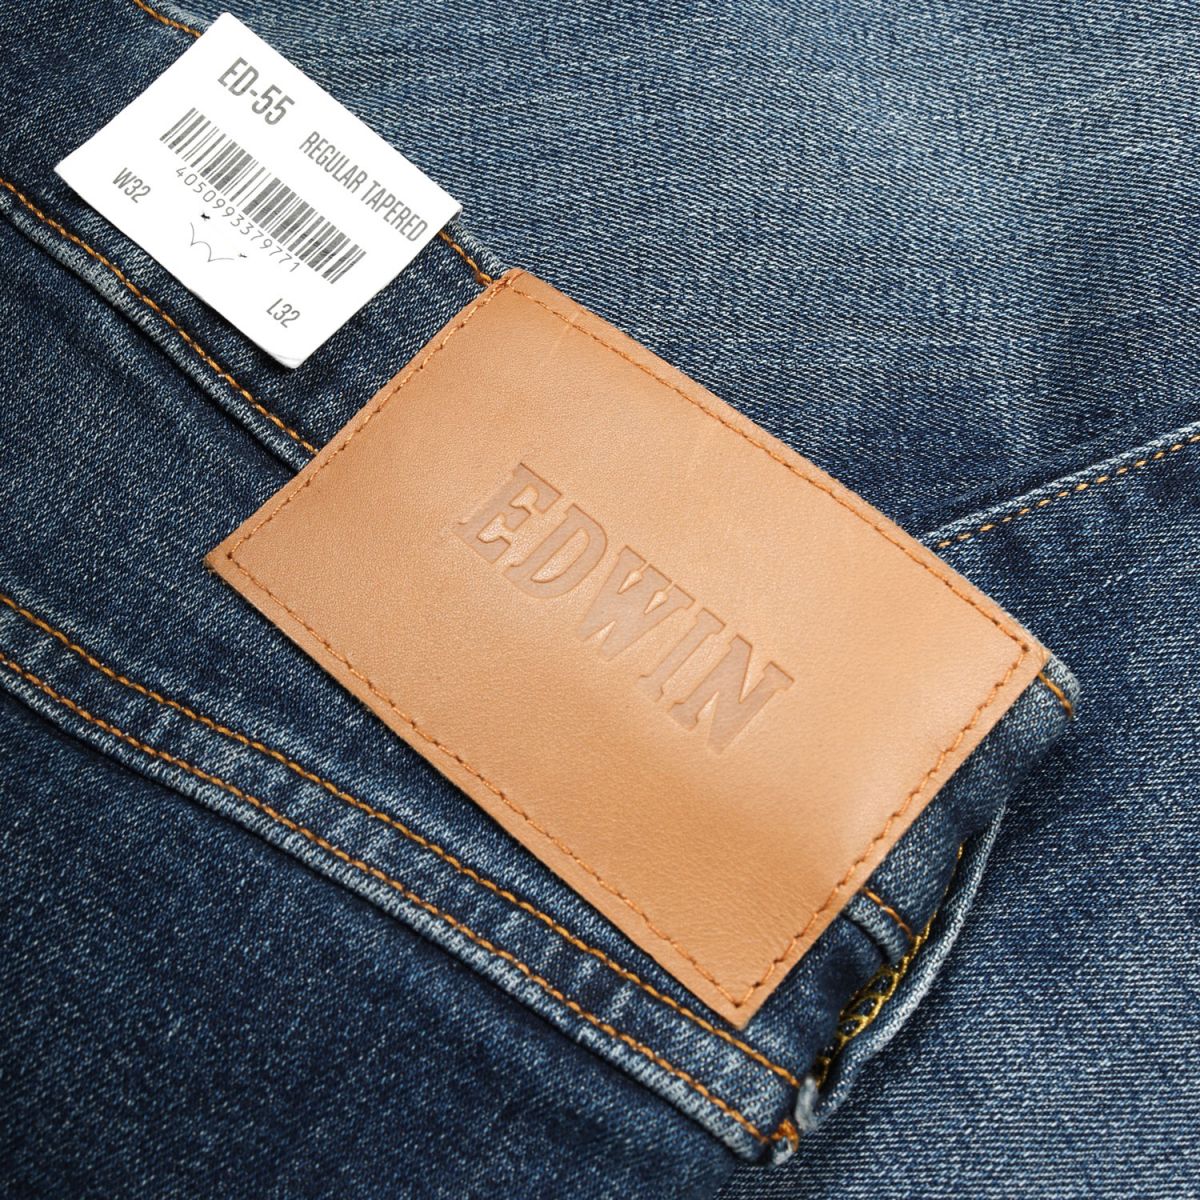 Edwin ED-55 Relax Taper Red Listed Selvage Jean - Lido Wash